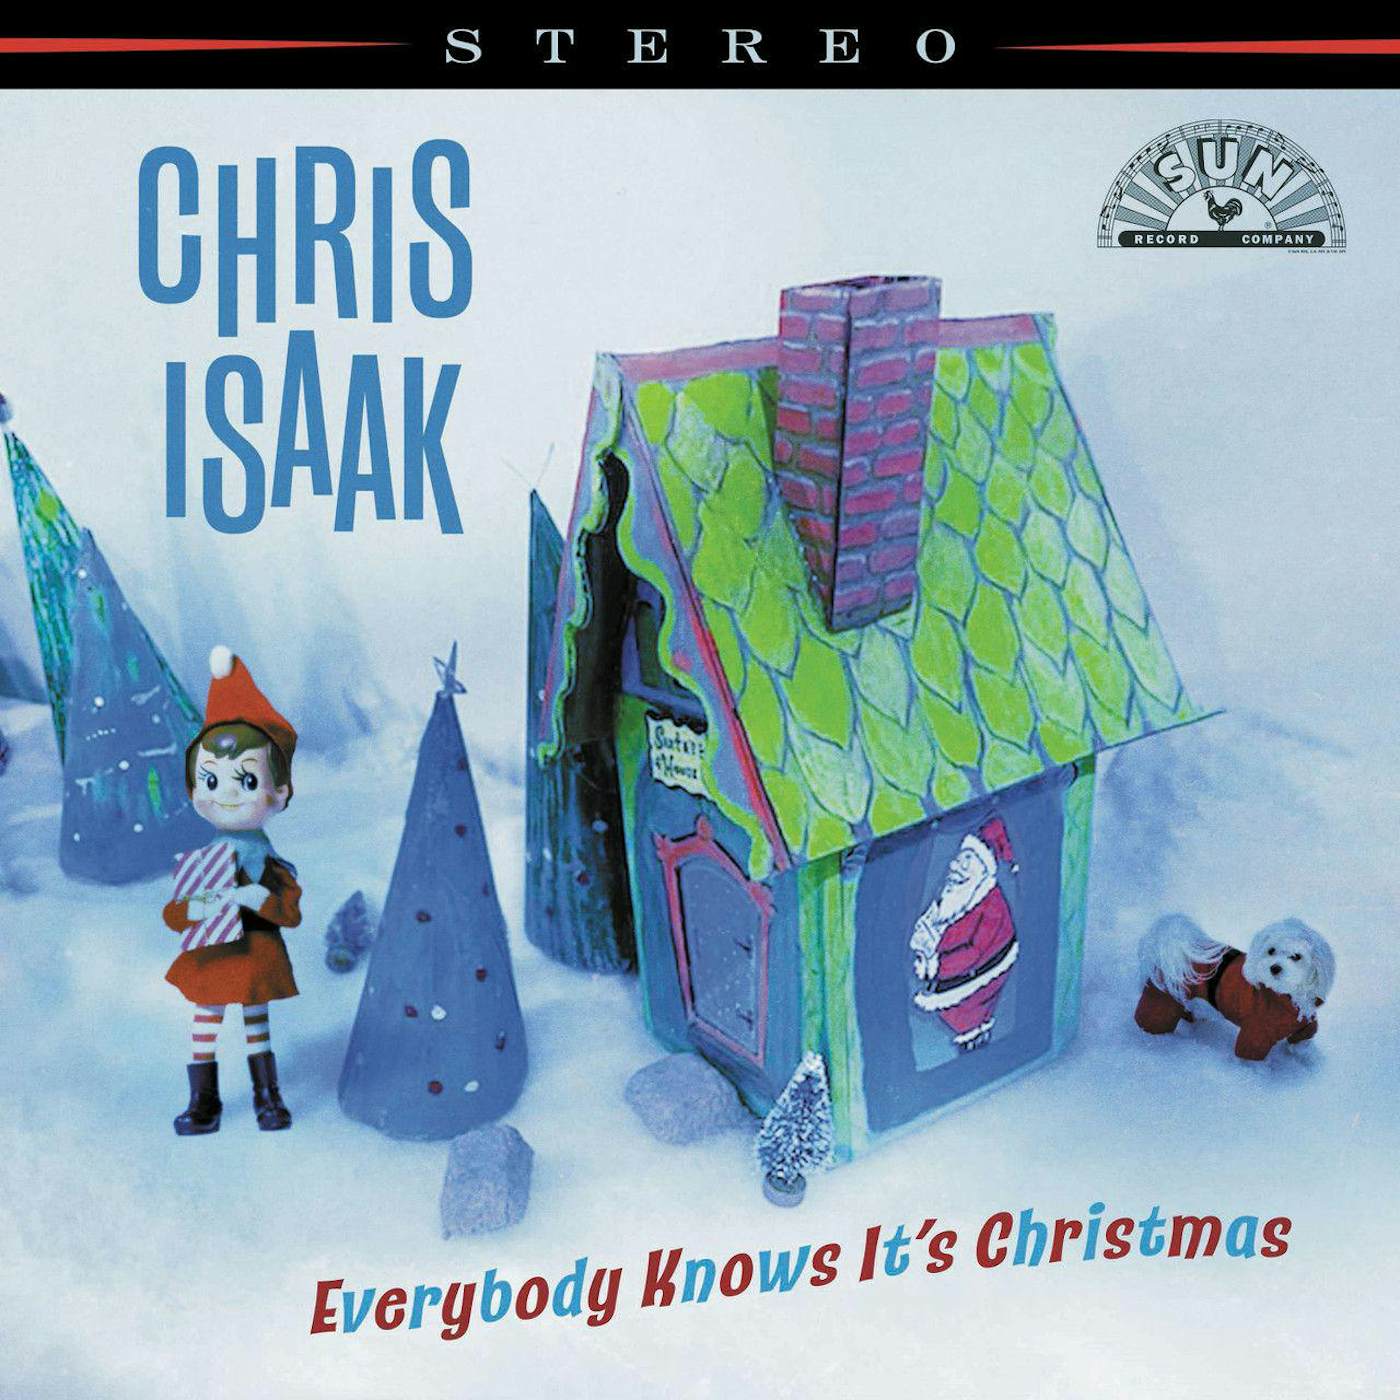 Chris Isaak Everybody Knows It's Christmas (Candy Floss) Vinyl Record